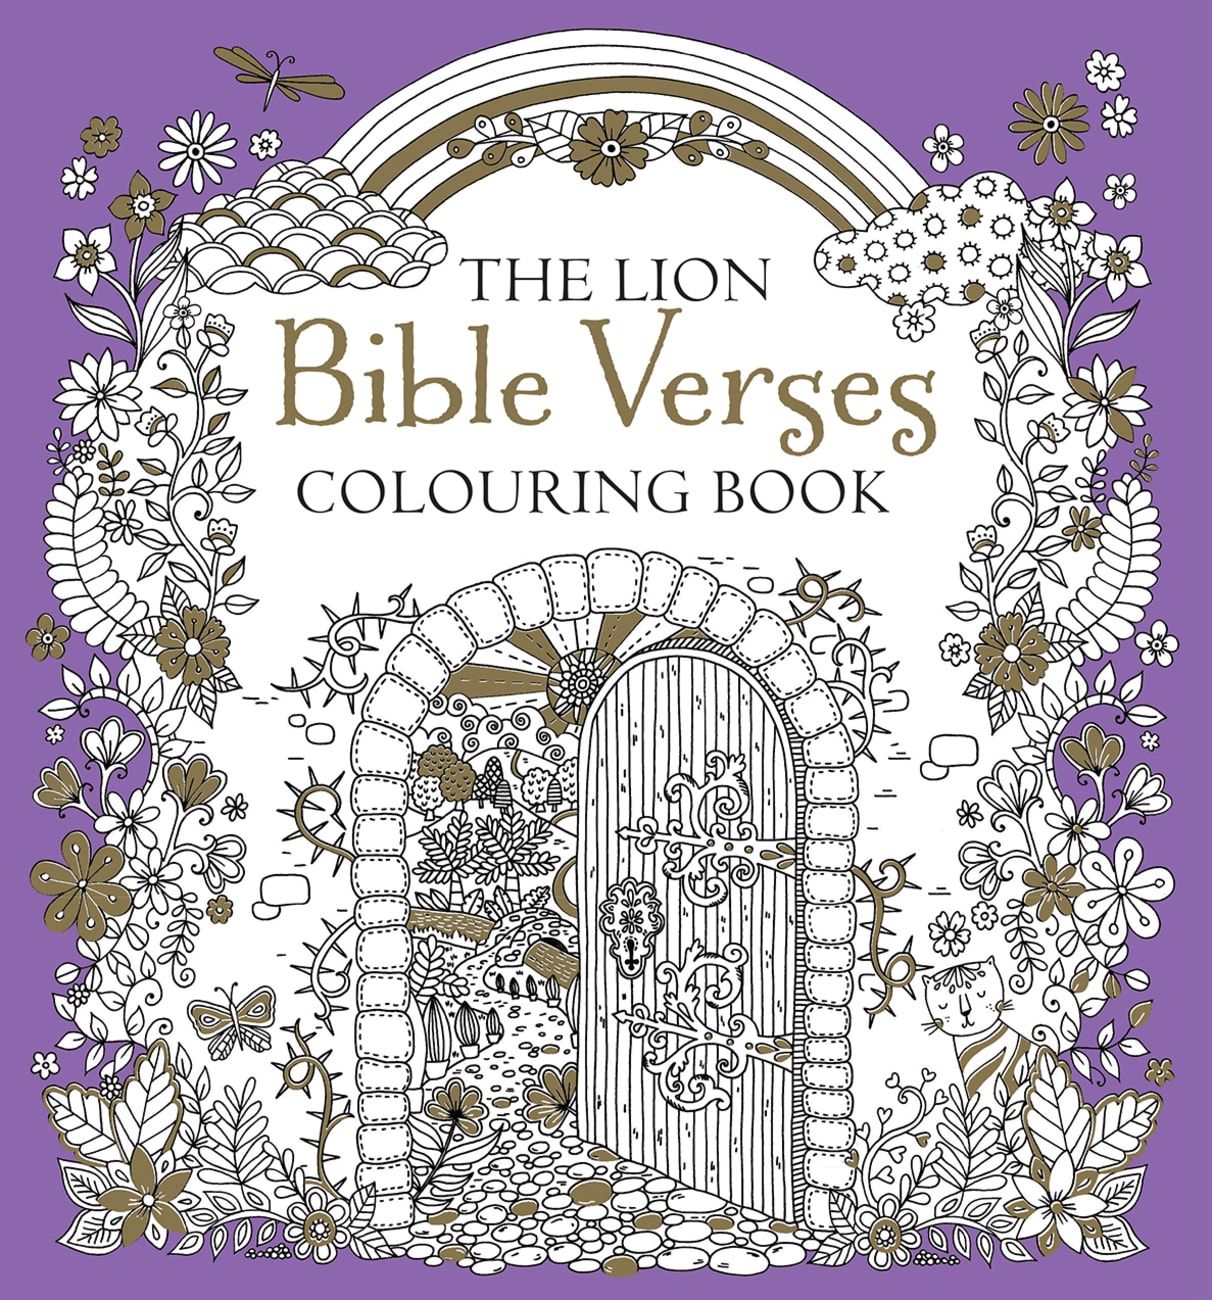 The Lion Bible Verses Colouring Book Paperback